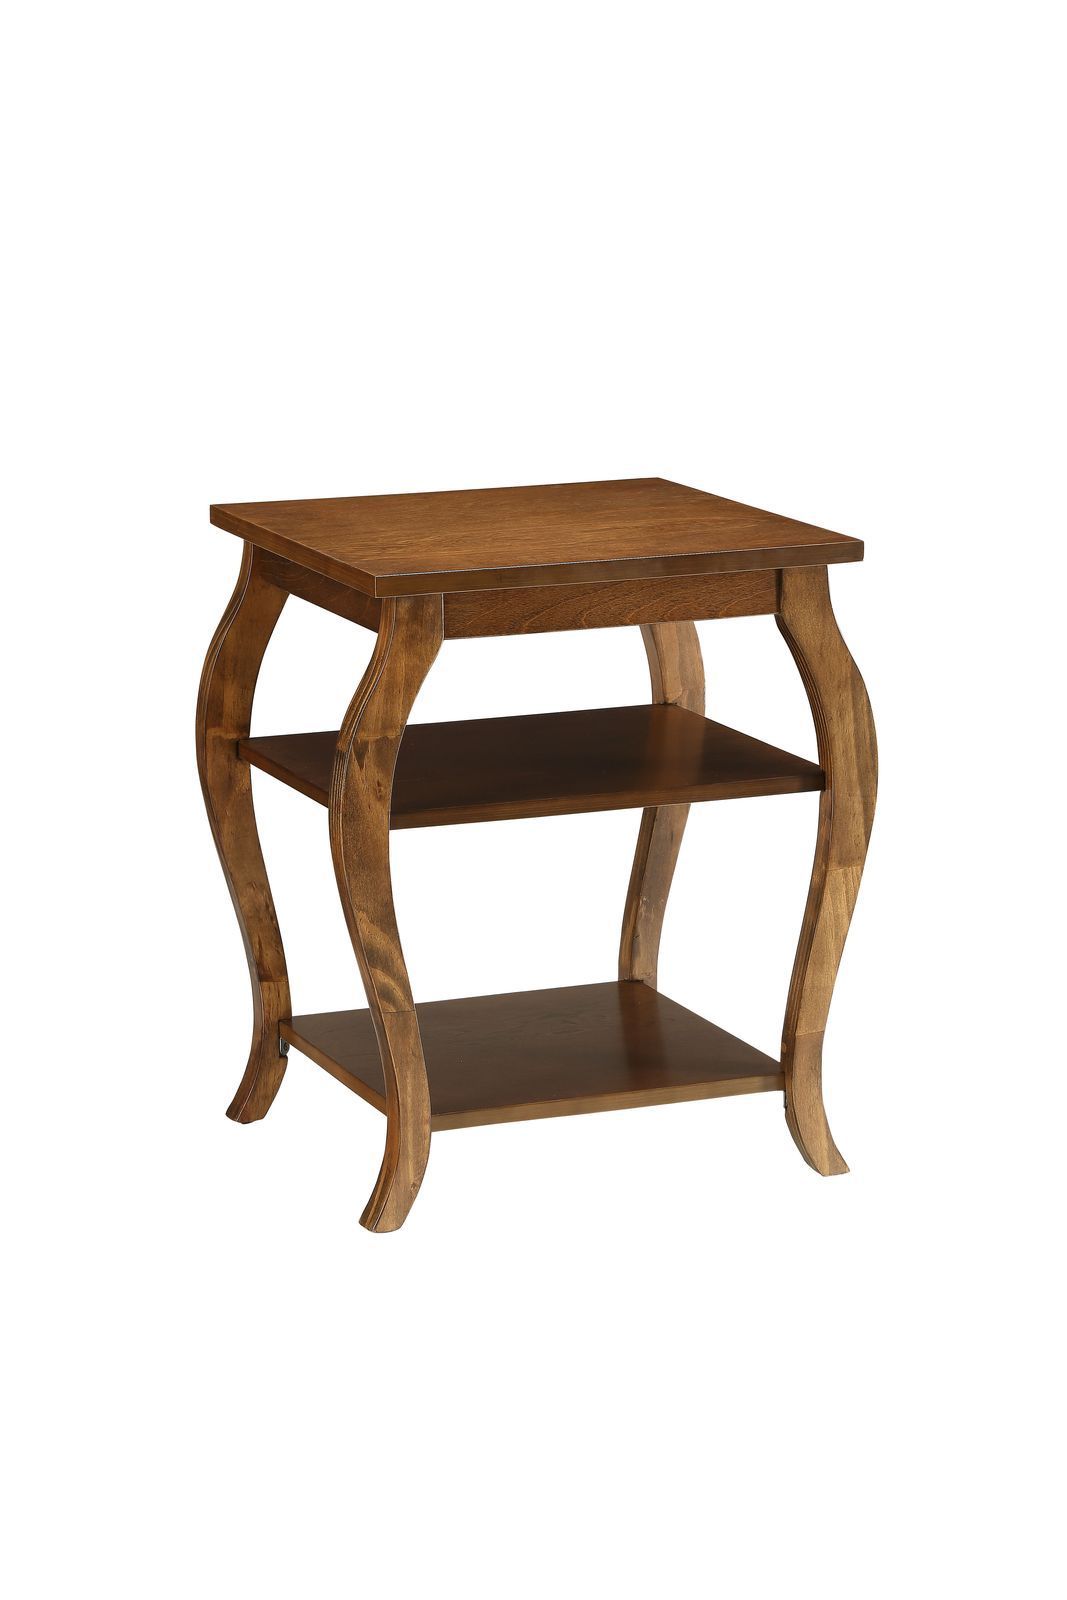 ACME Becci End Table in Walnut